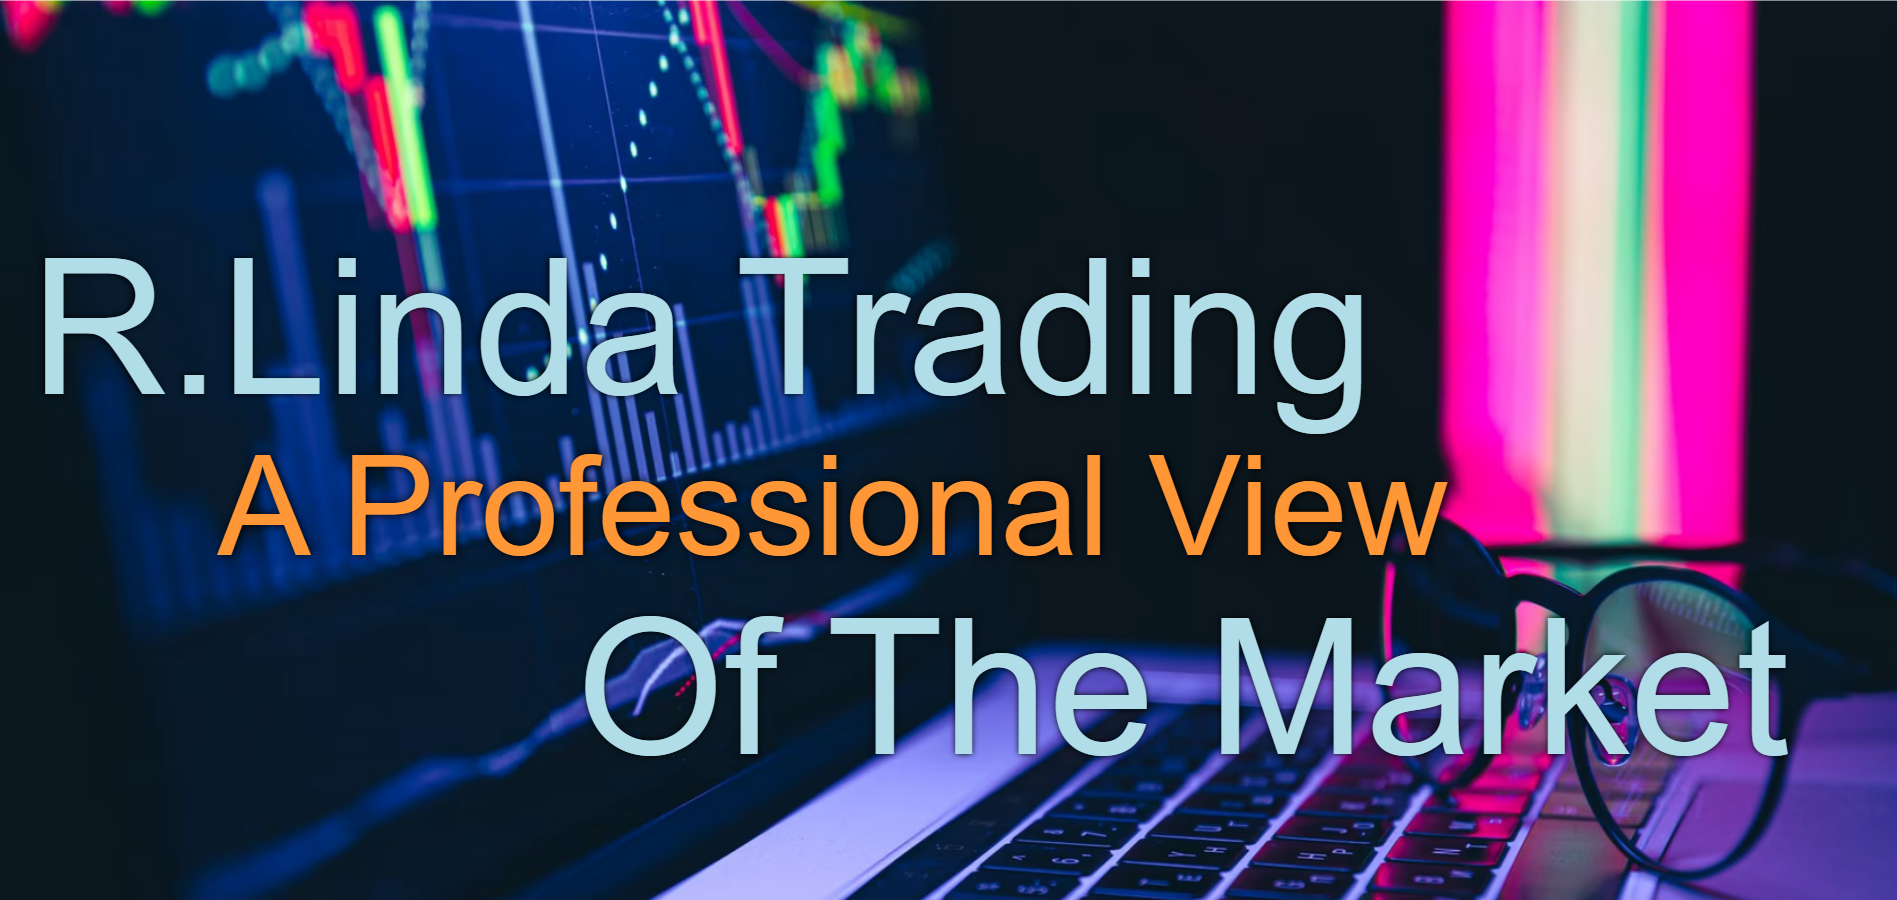 Navigating the Financial Markets with R. Linda Trading